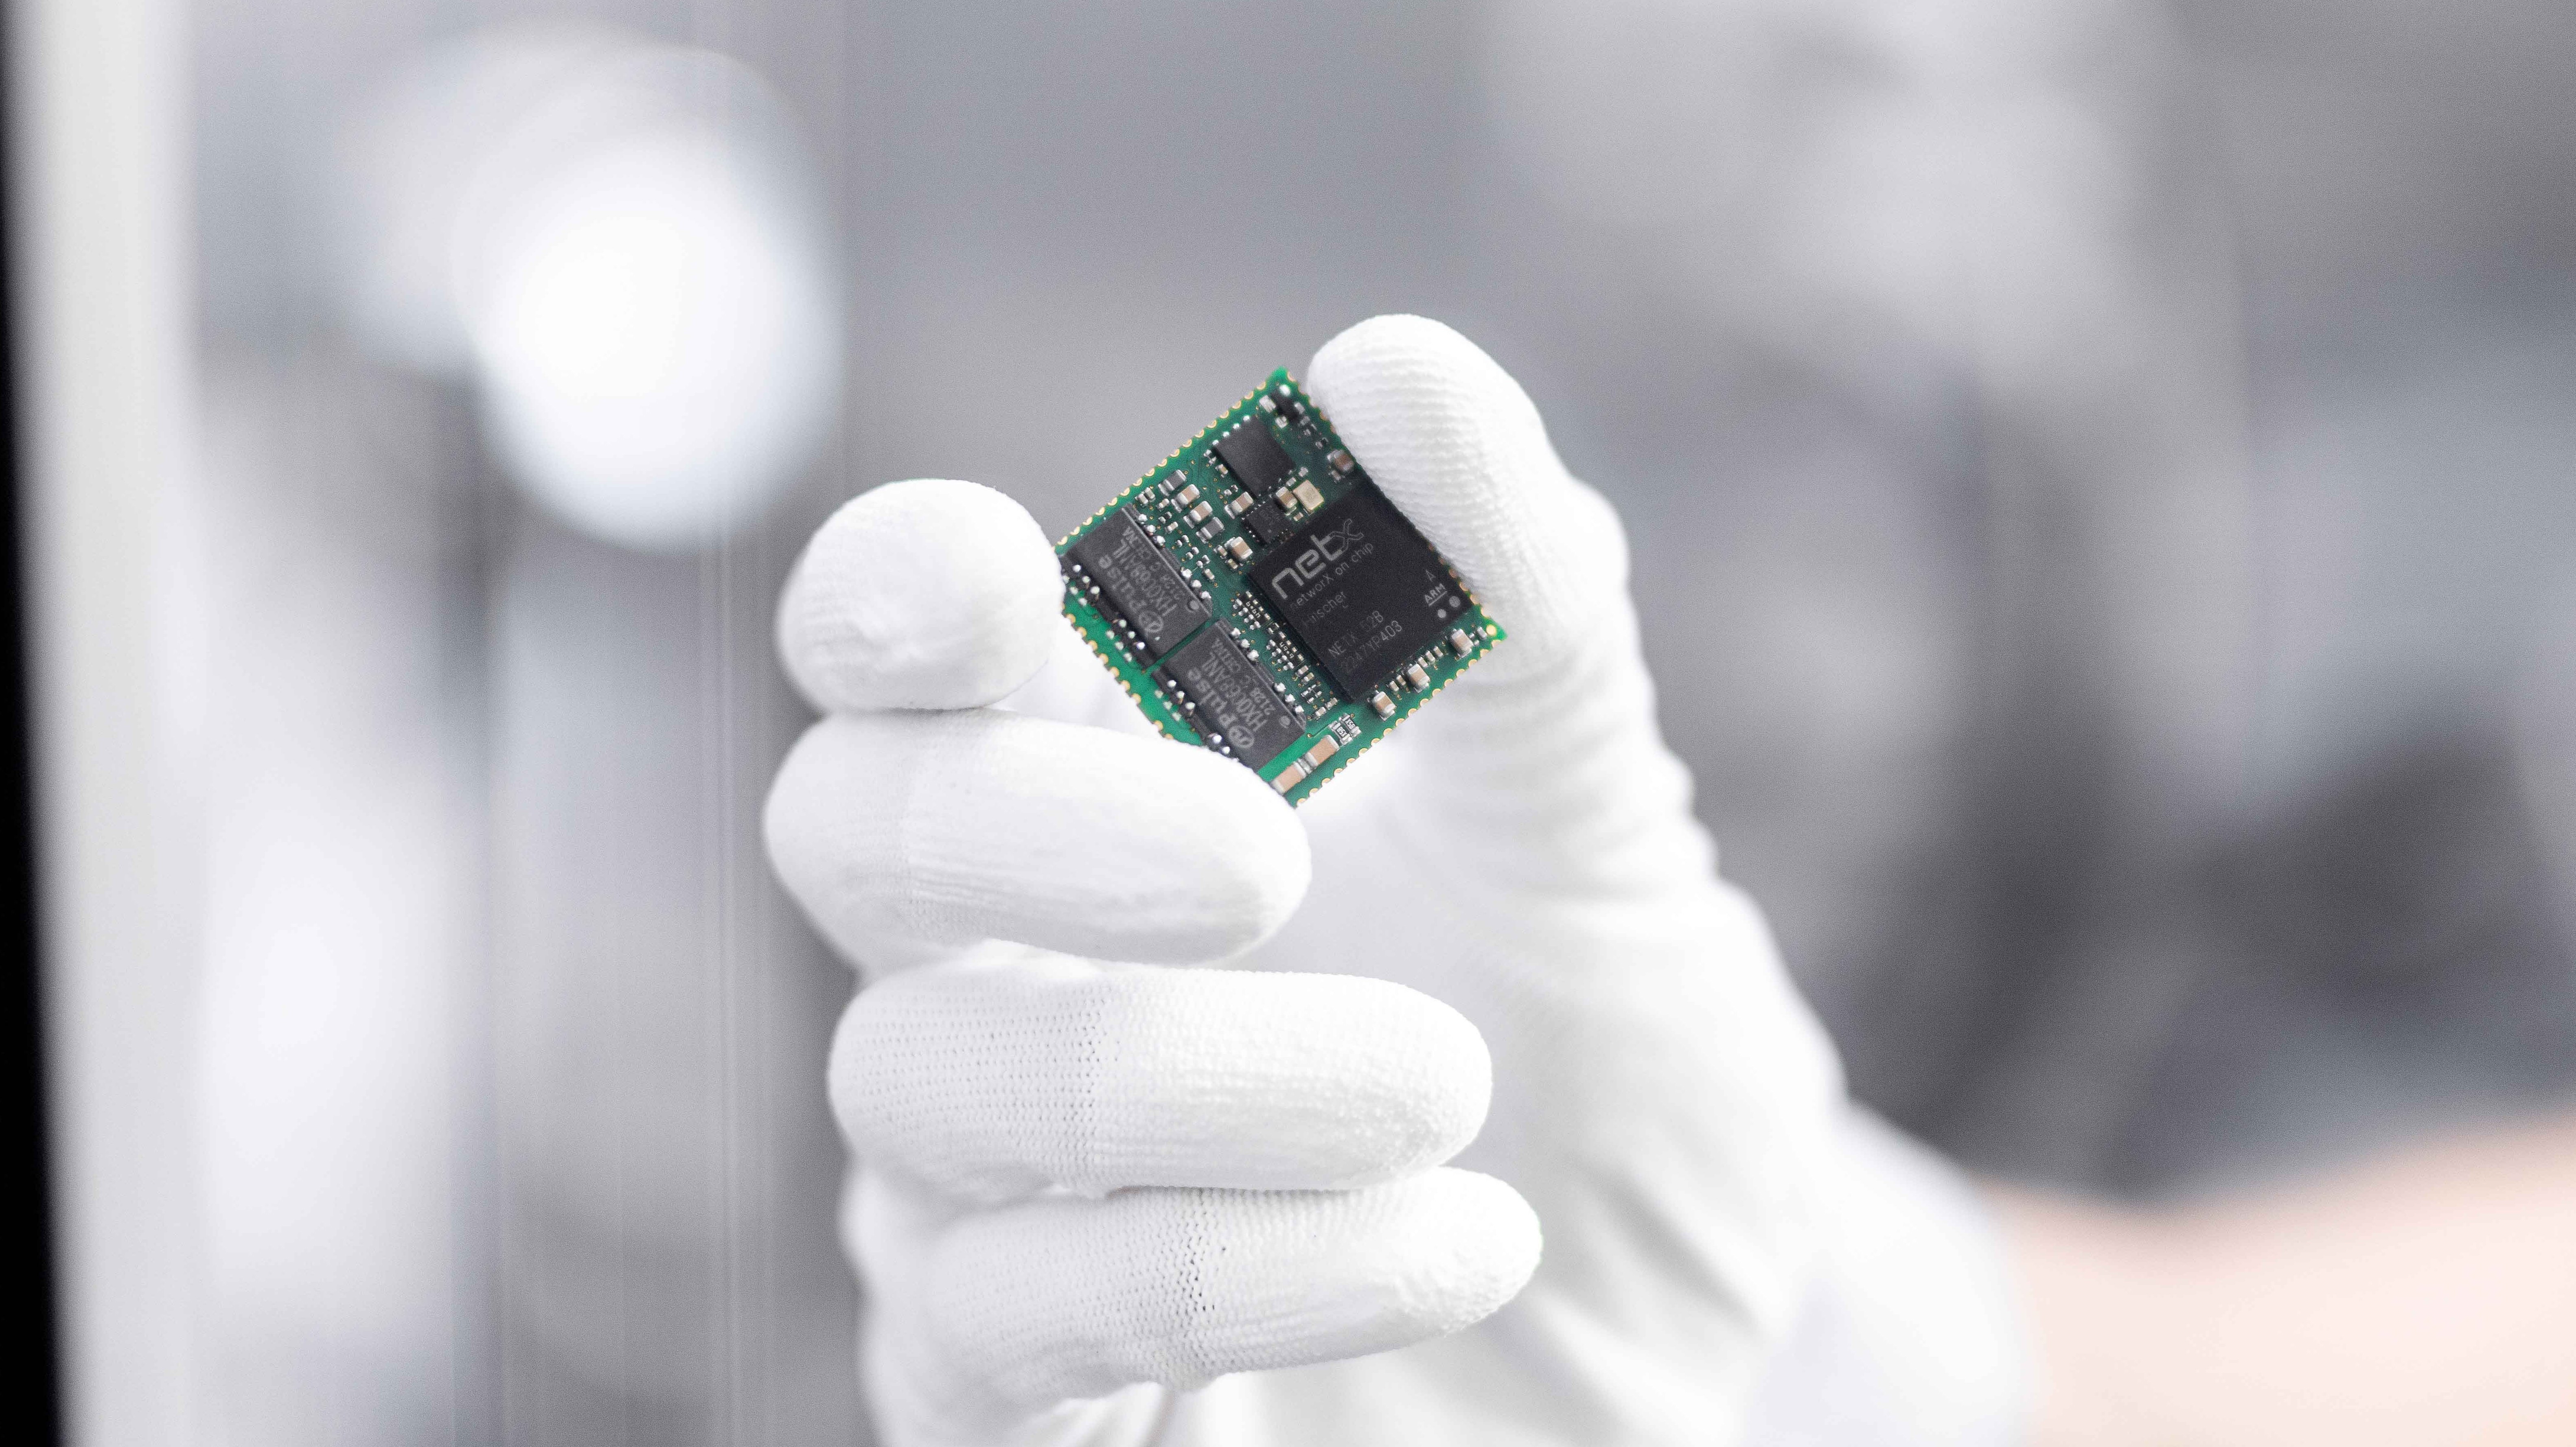 A hand in a white glove holds an embedd module from Hilscher. Mounted on the green square module is a netX 52.